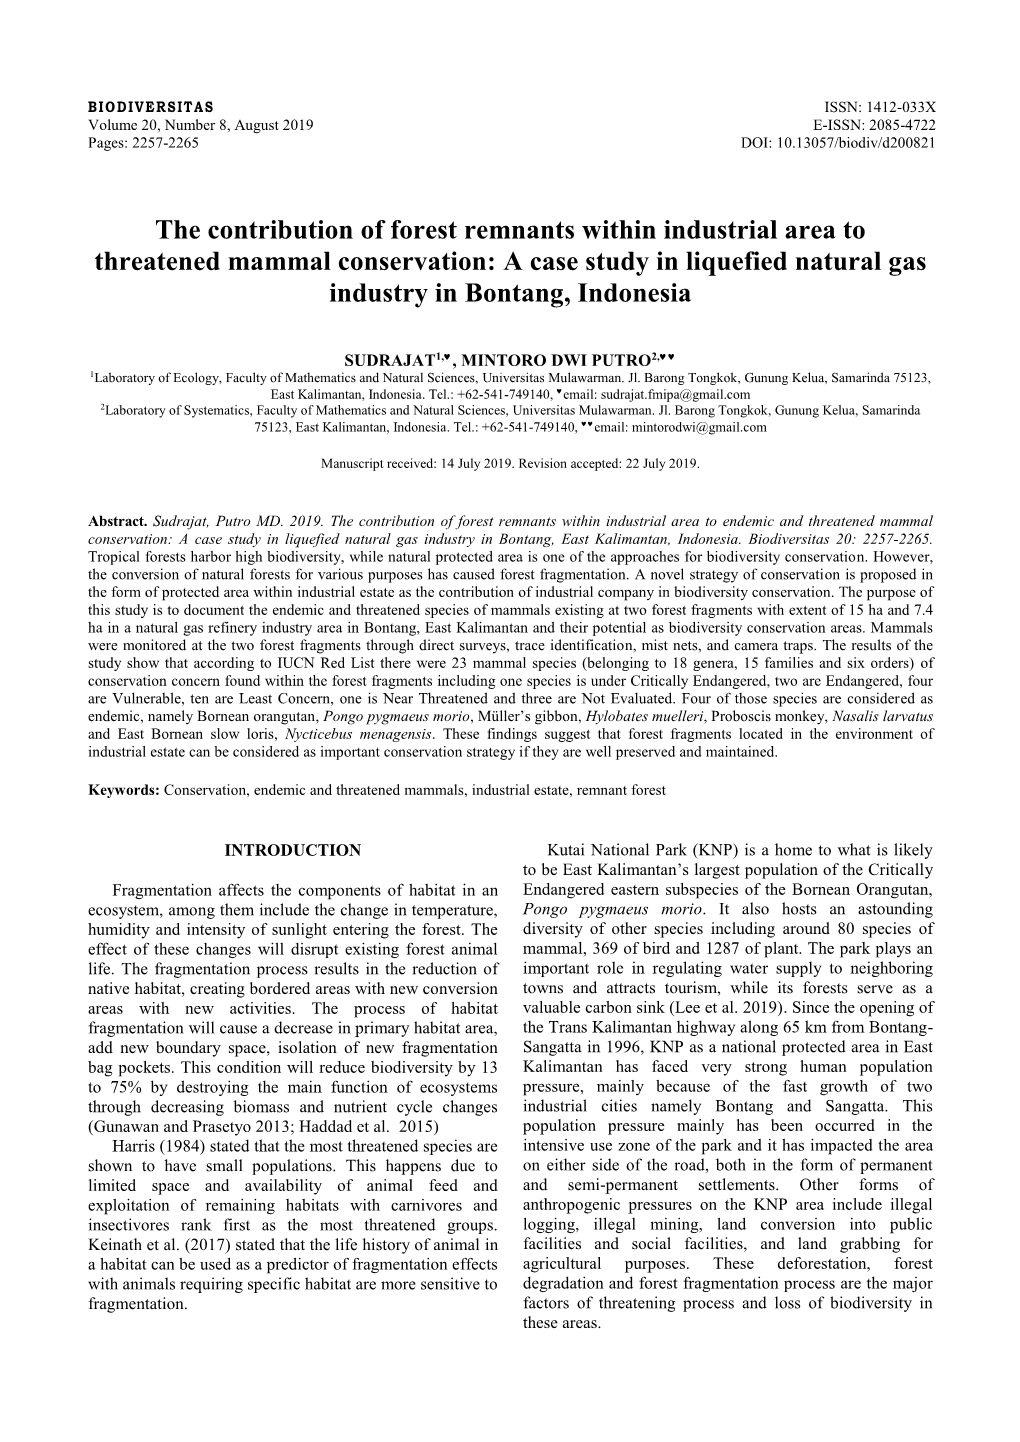 A Case Study in Liquefied Natural Gas Industry in Bontang, Indonesia